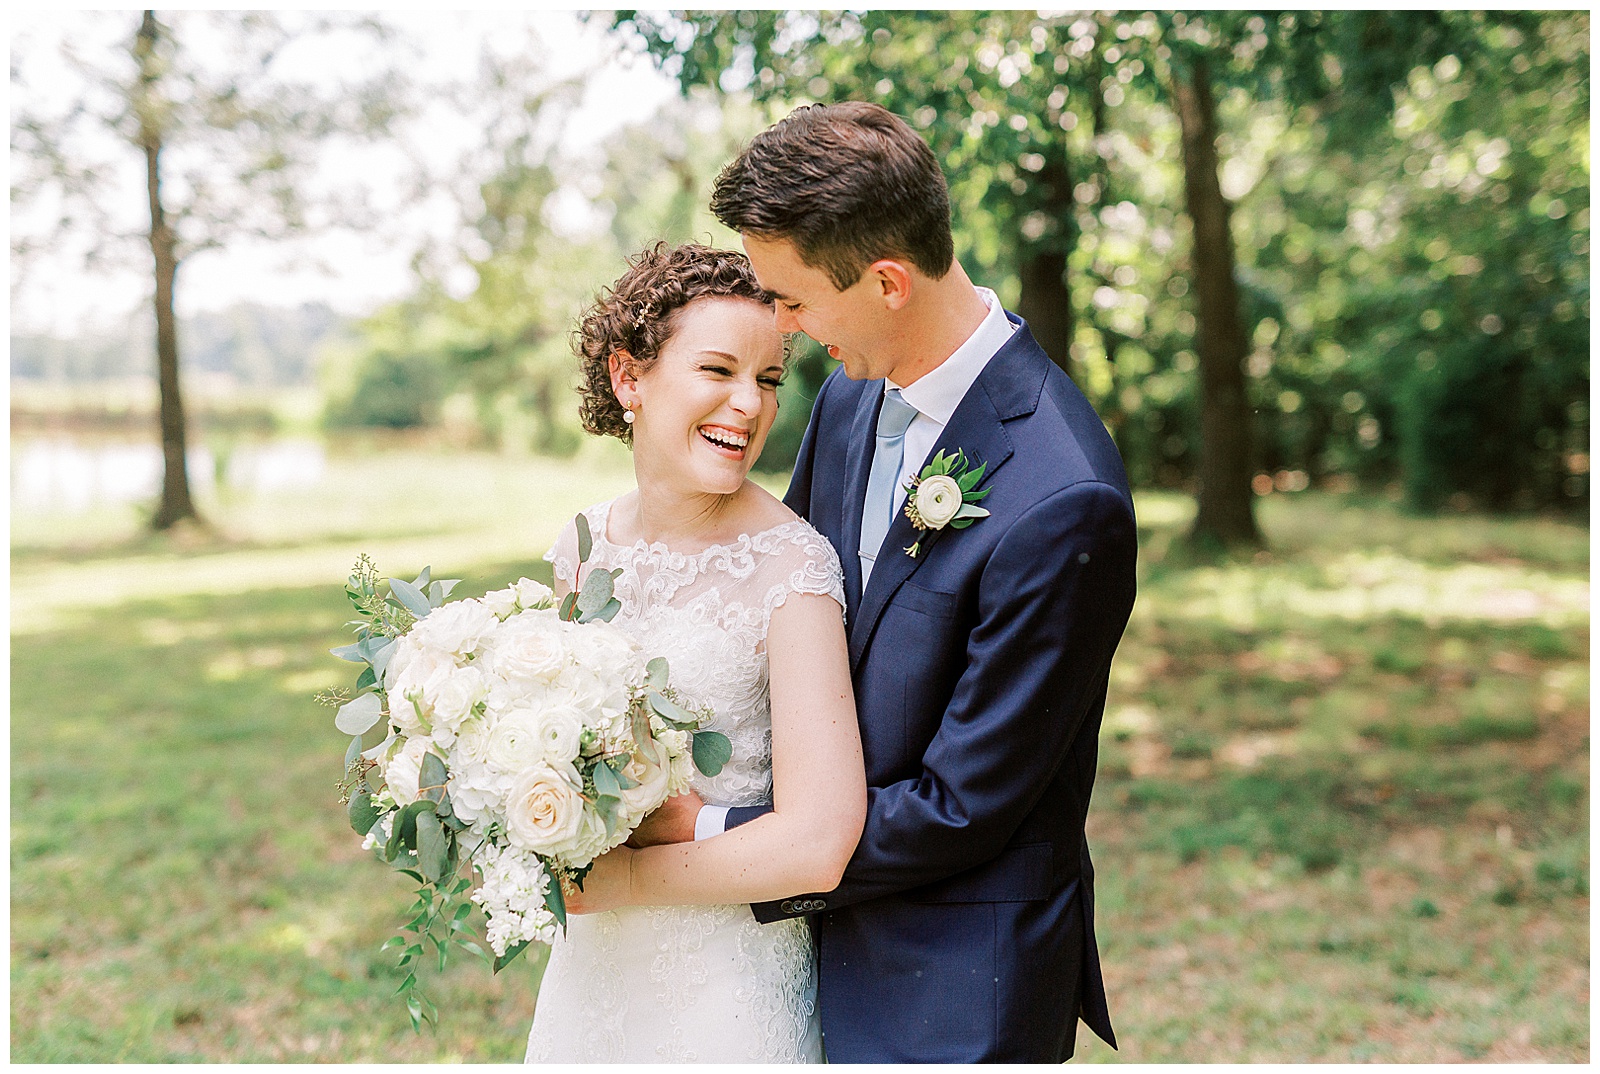 outside bride groom wedding day portraits curly short haired bride with lace wedding dress and navy blue suit groom